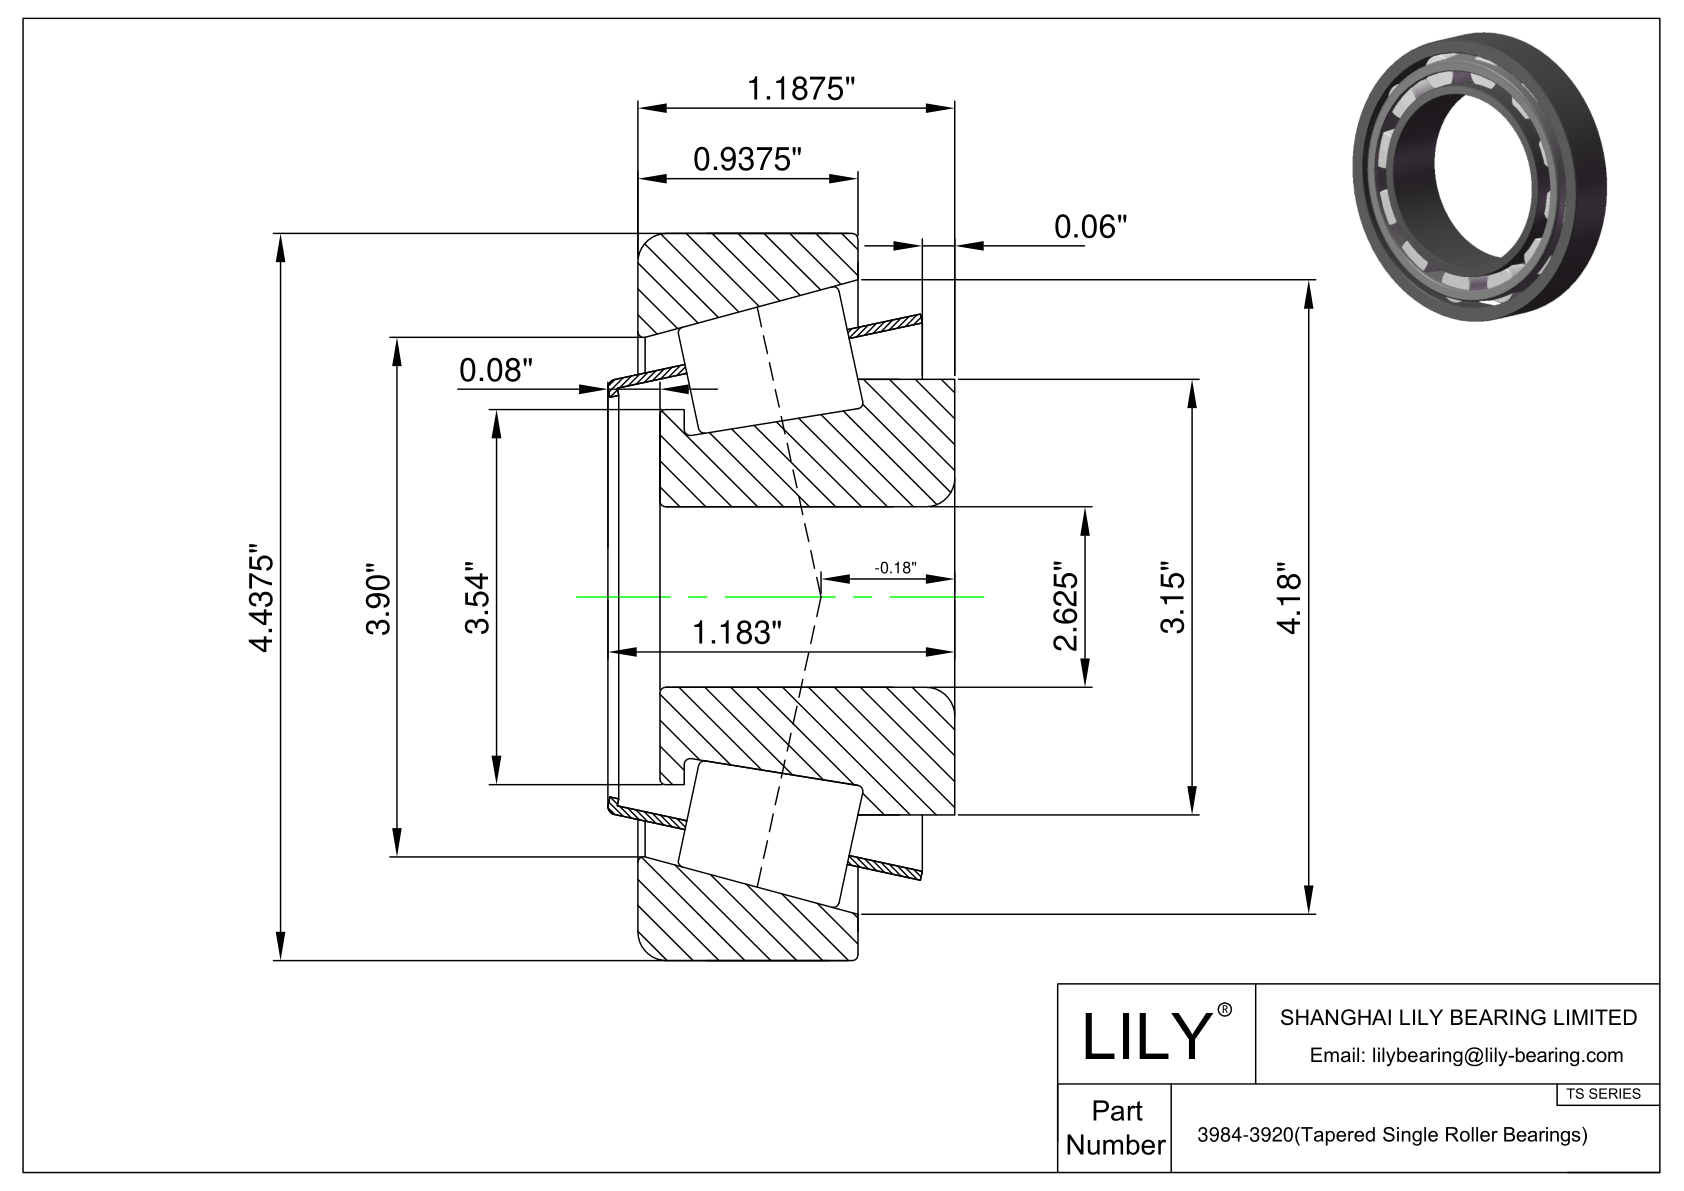 3984-3920 TS (Tapered Single Roller Bearings) (Imperial) cad drawing